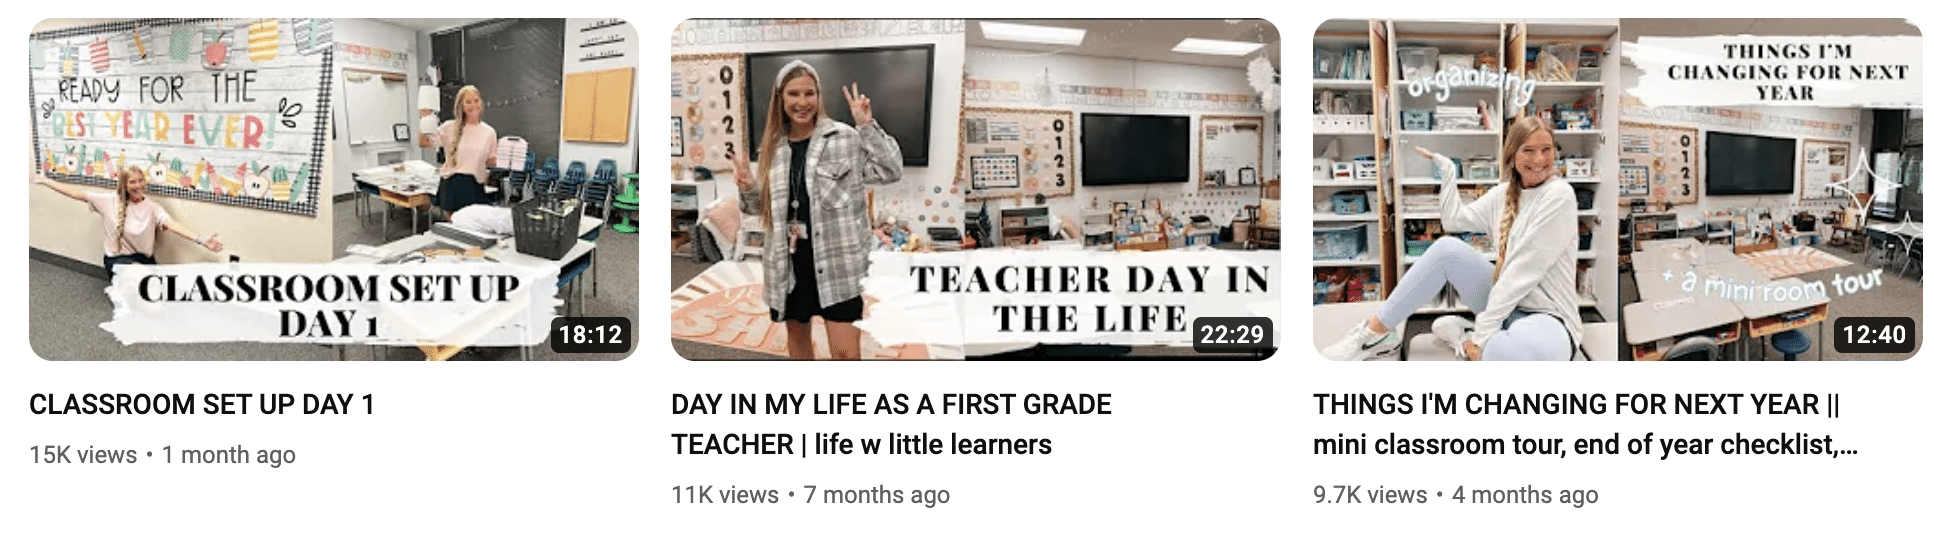 A series of youtube videos about teaching in the classroom from influencer lifewlittlelearners.